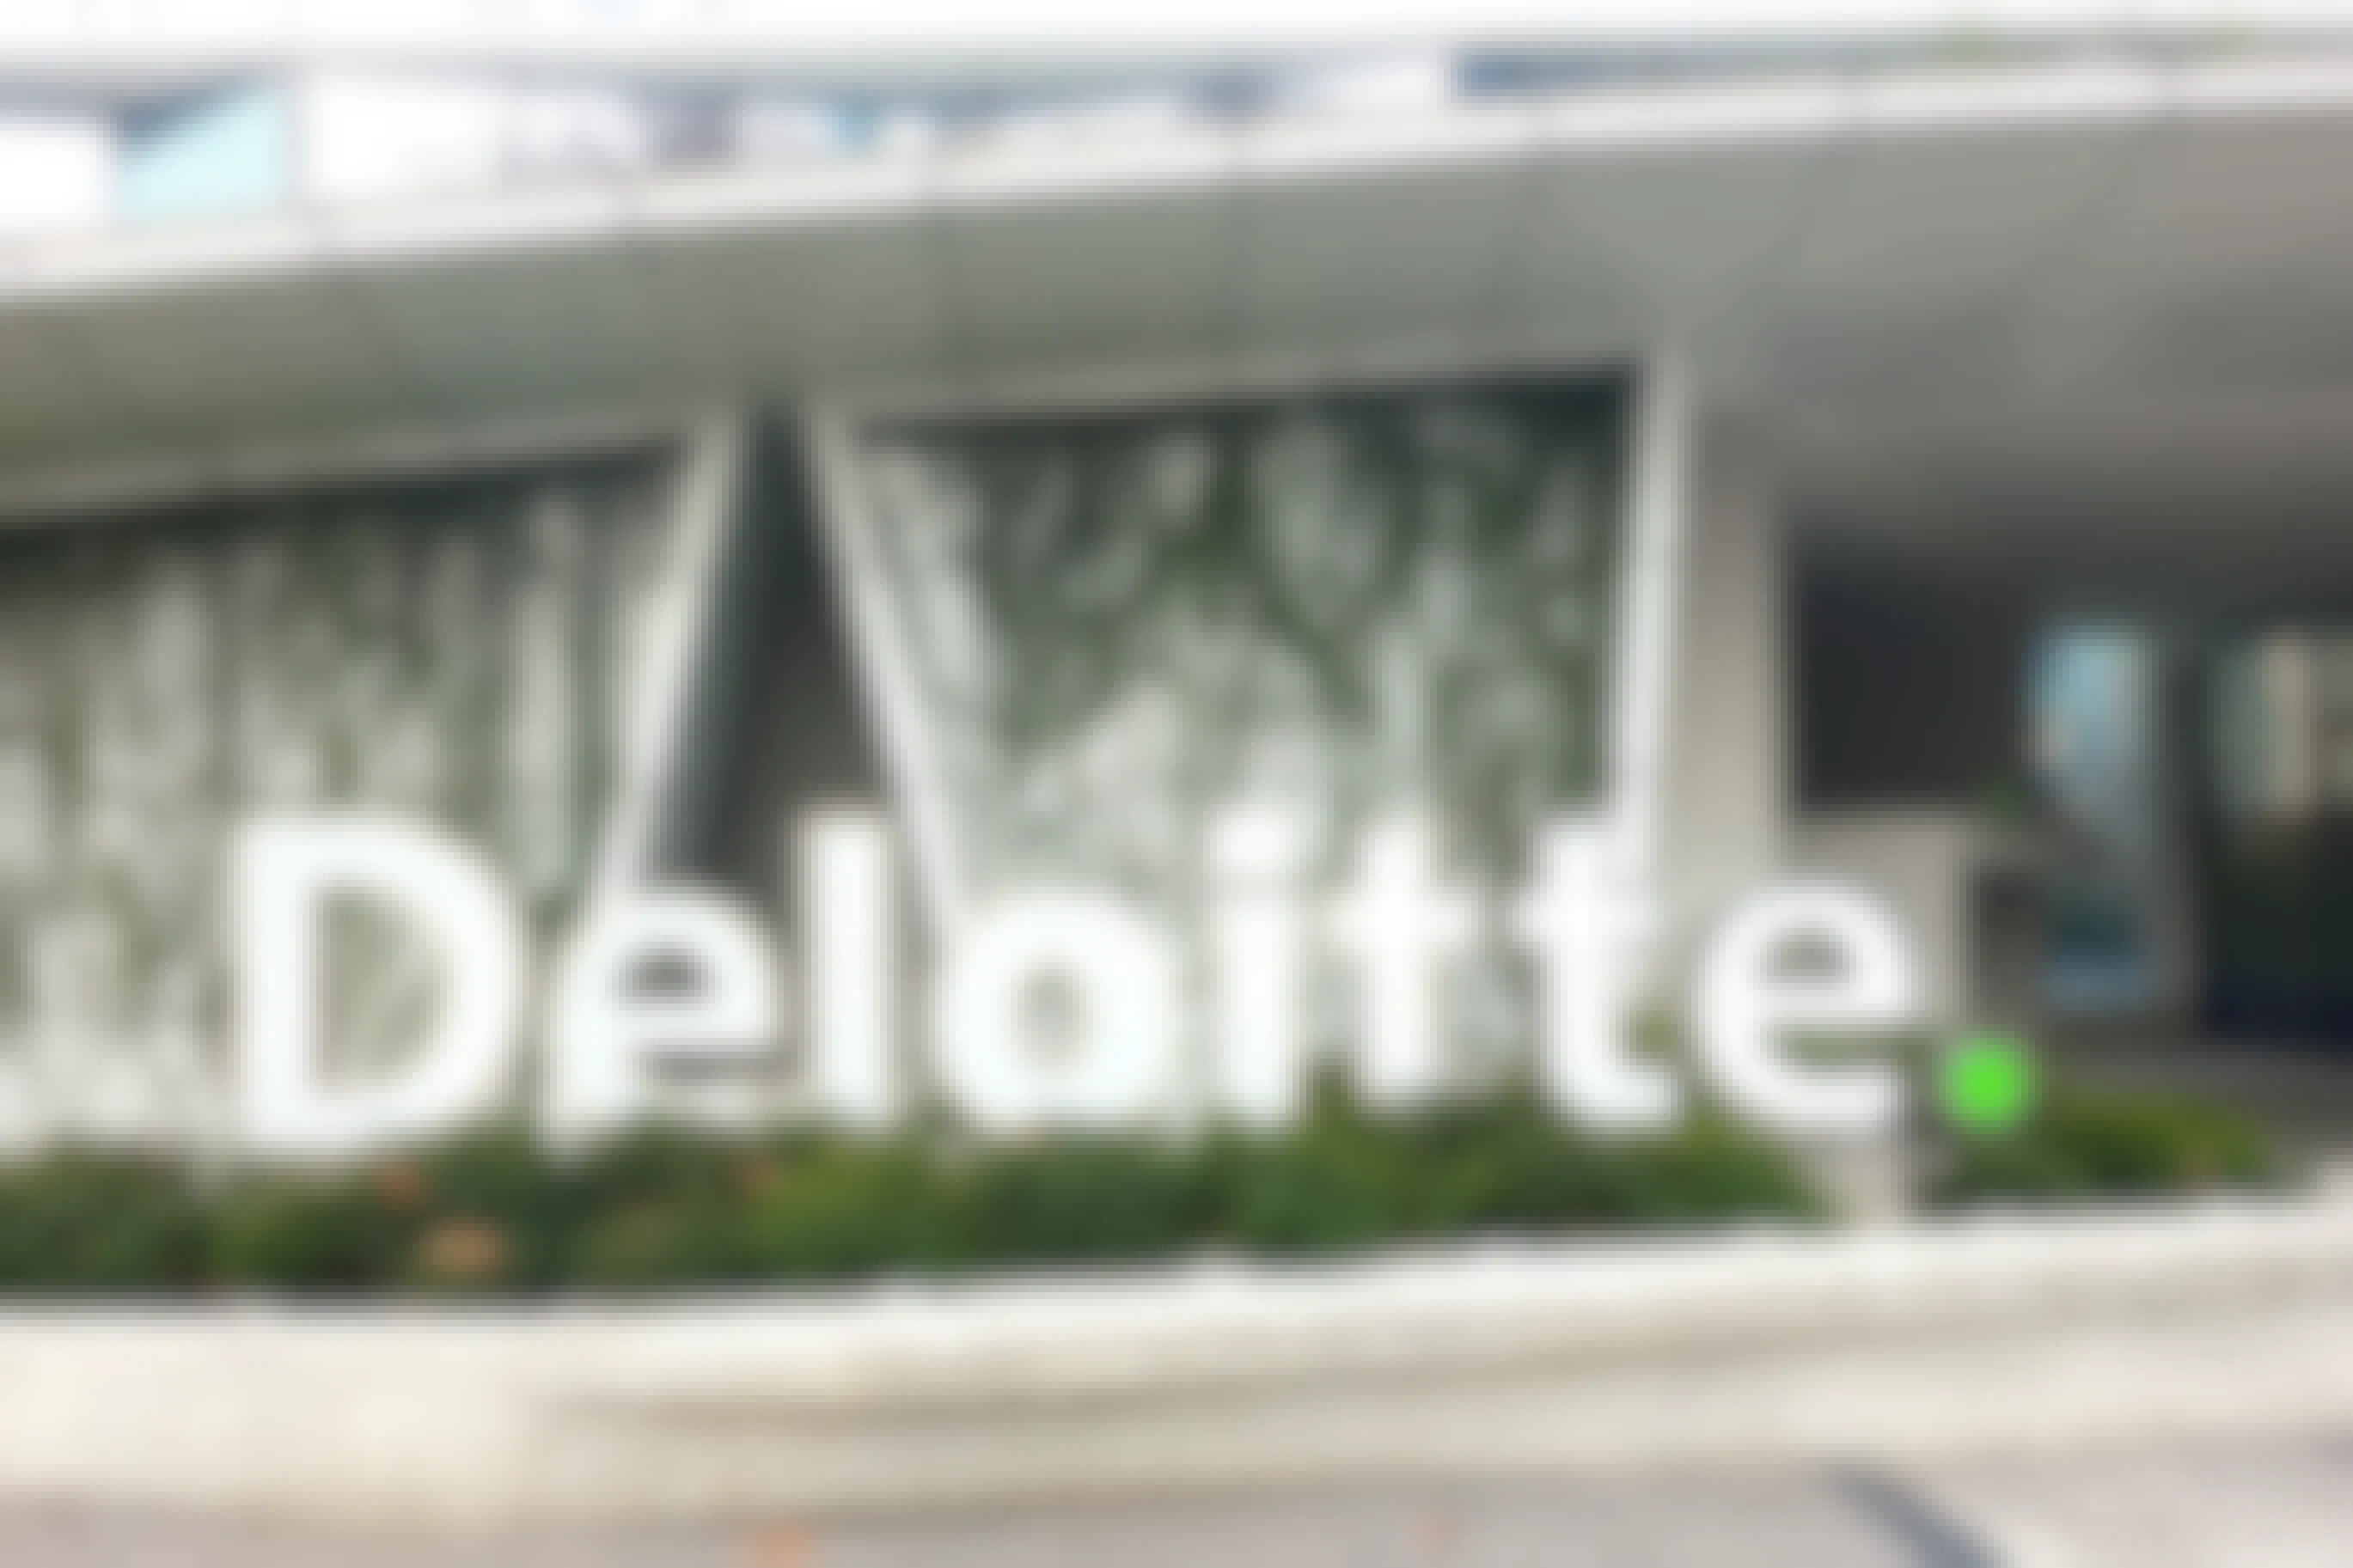 The Deloitte sign in front of their building